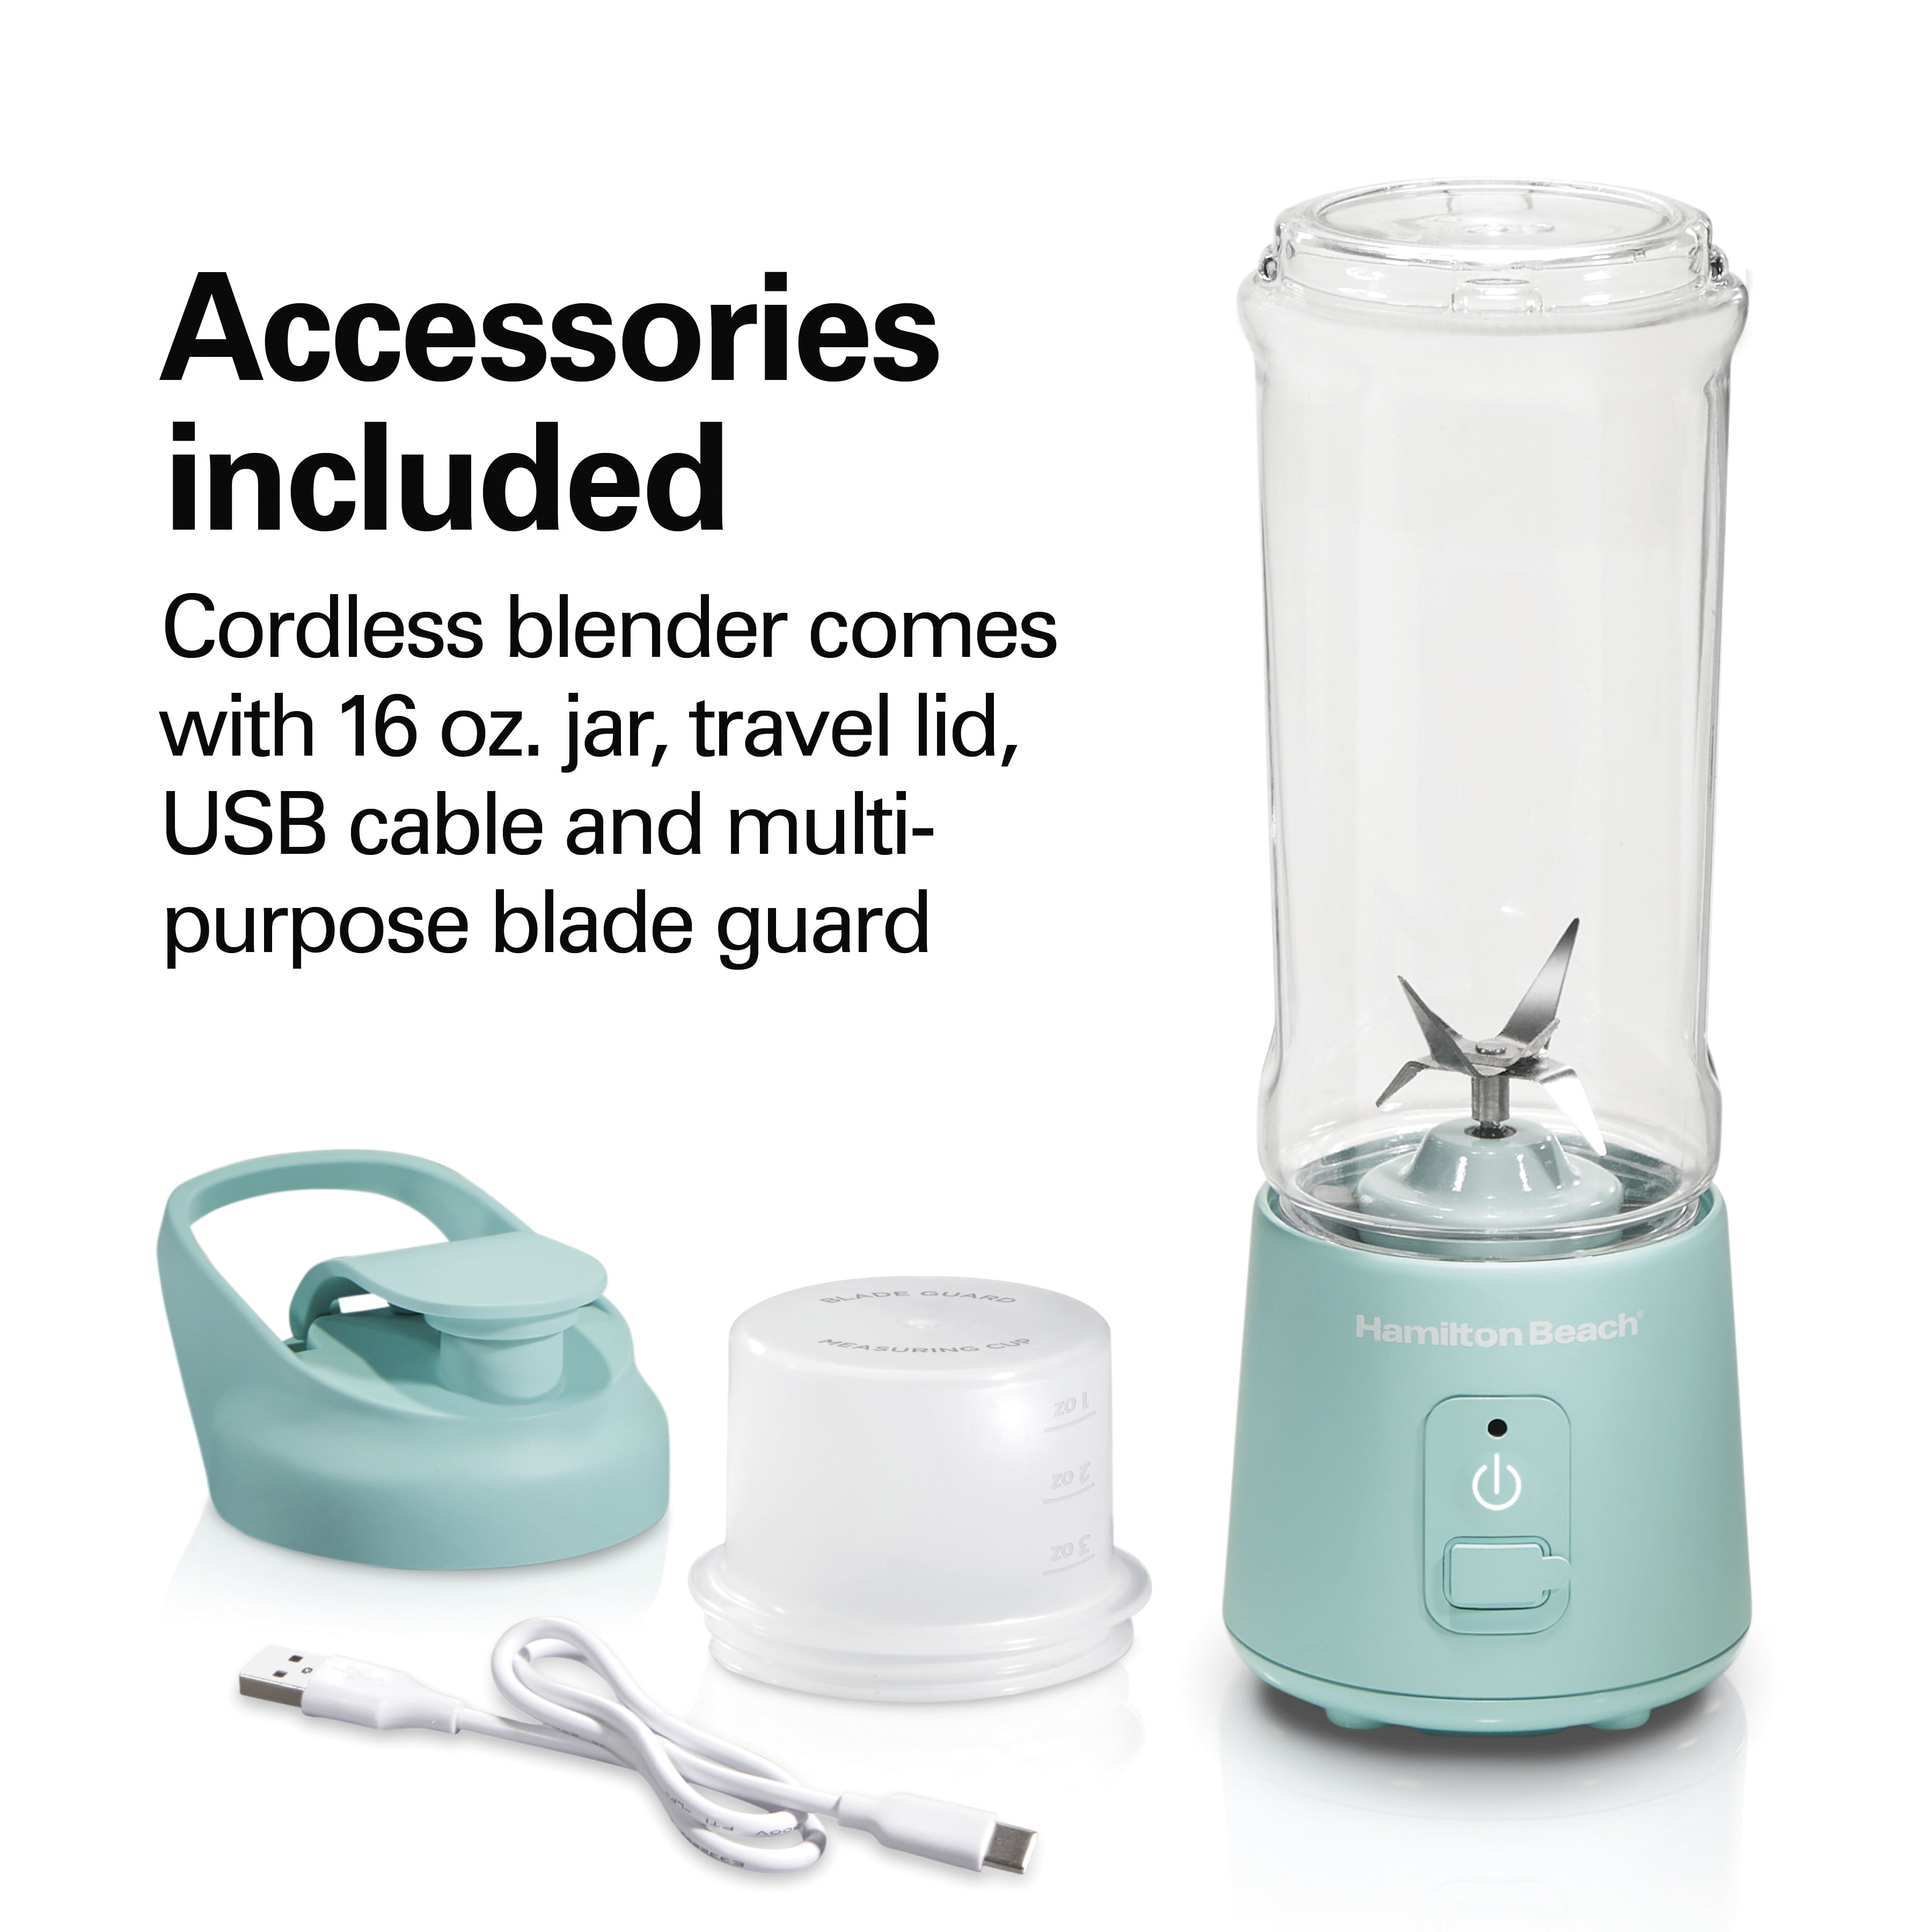 Hamilton Beach Mini Cordless Portable Personal Blender for Shakes and  Smoothies, USB Rechargeable, 16 oz. Jar with Leakproof Travel Lid, 6  Stainless